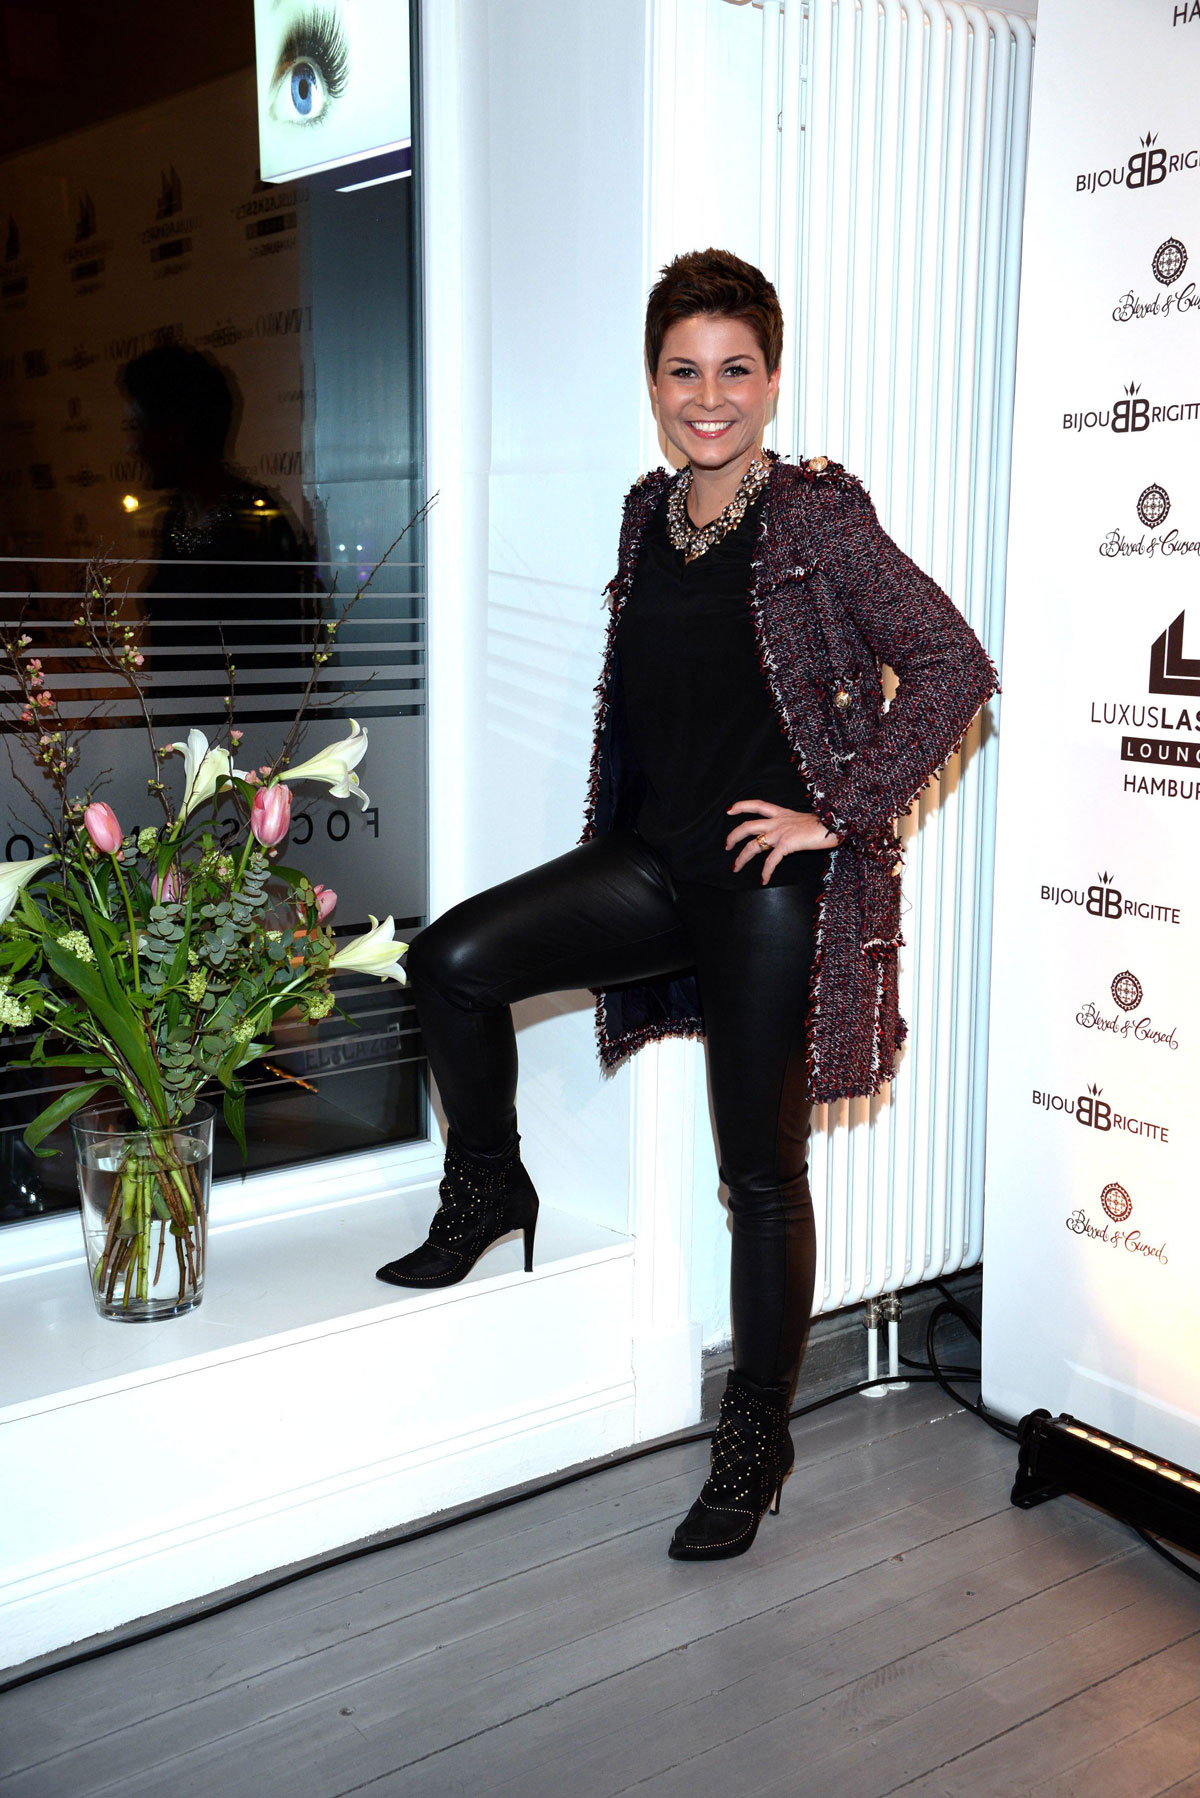 Vanessa Blumhagen attends opening of the first LuxusLashes Lounge